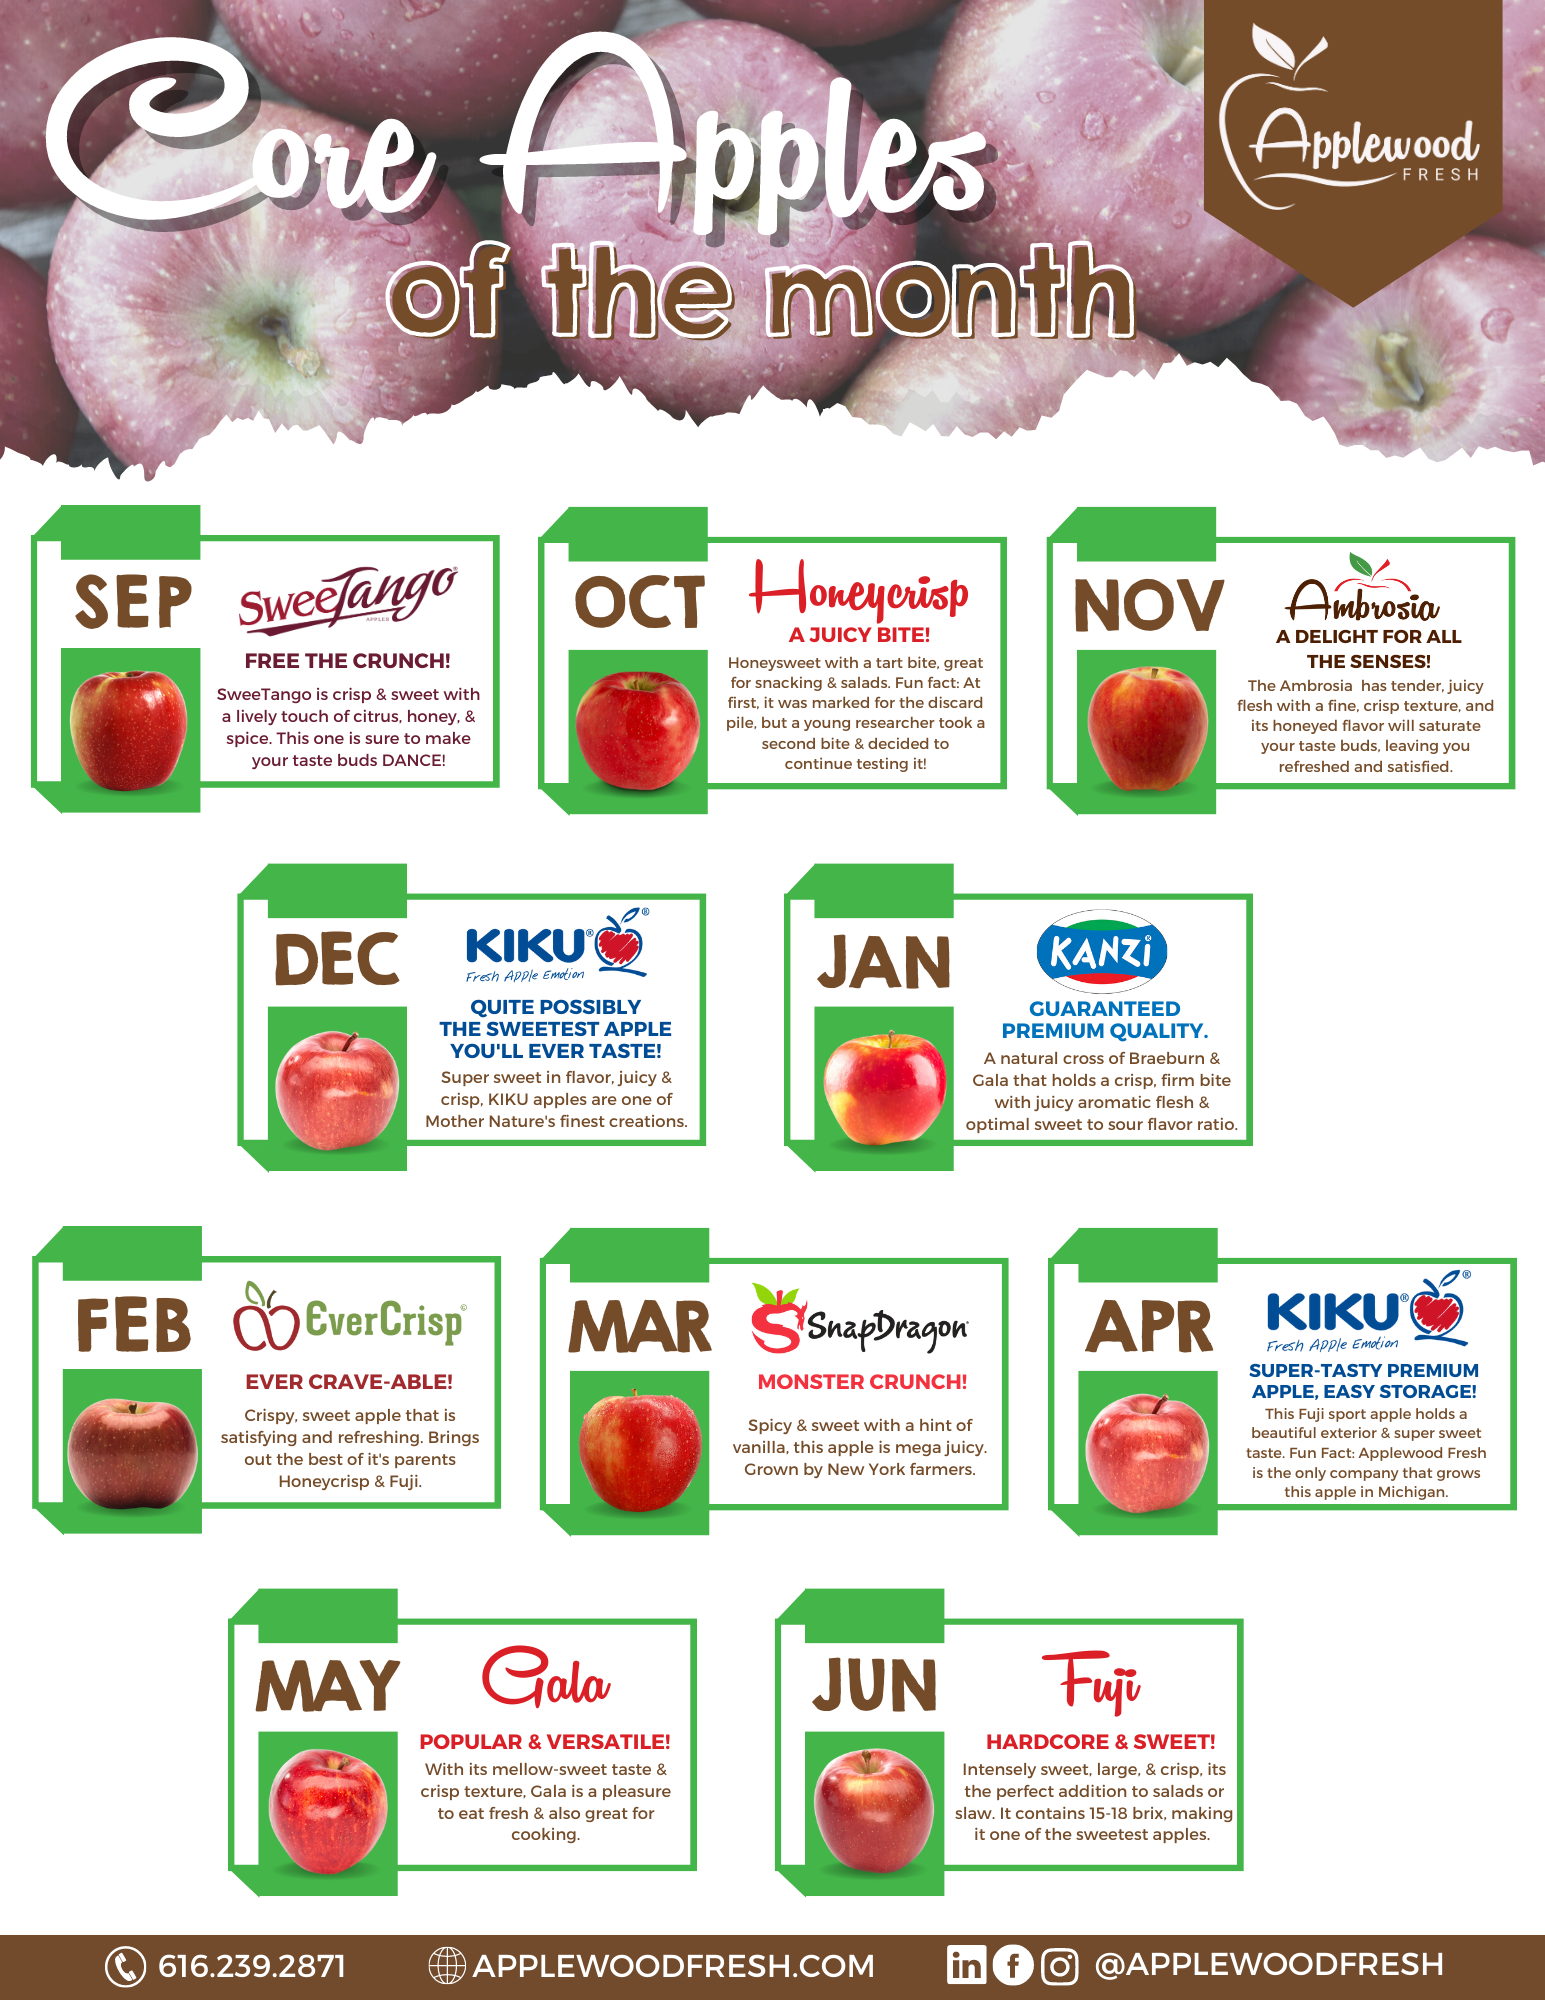 Applewood Fresh Core Apples by the month